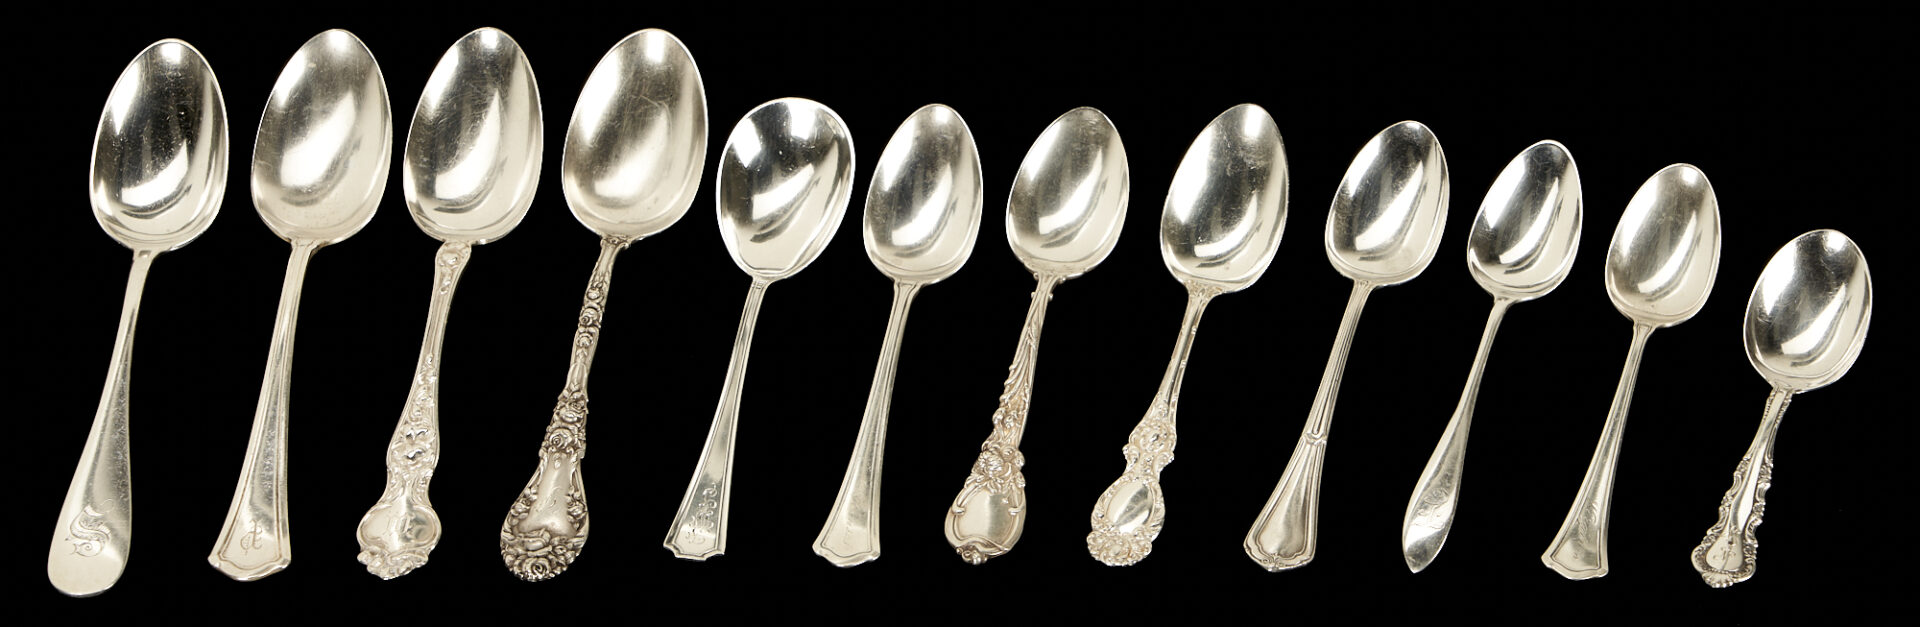 Lot 787: 39 Pcs. Assorted Sterling Flatware: Reed & Barton, Wallace, Dominic & Haff